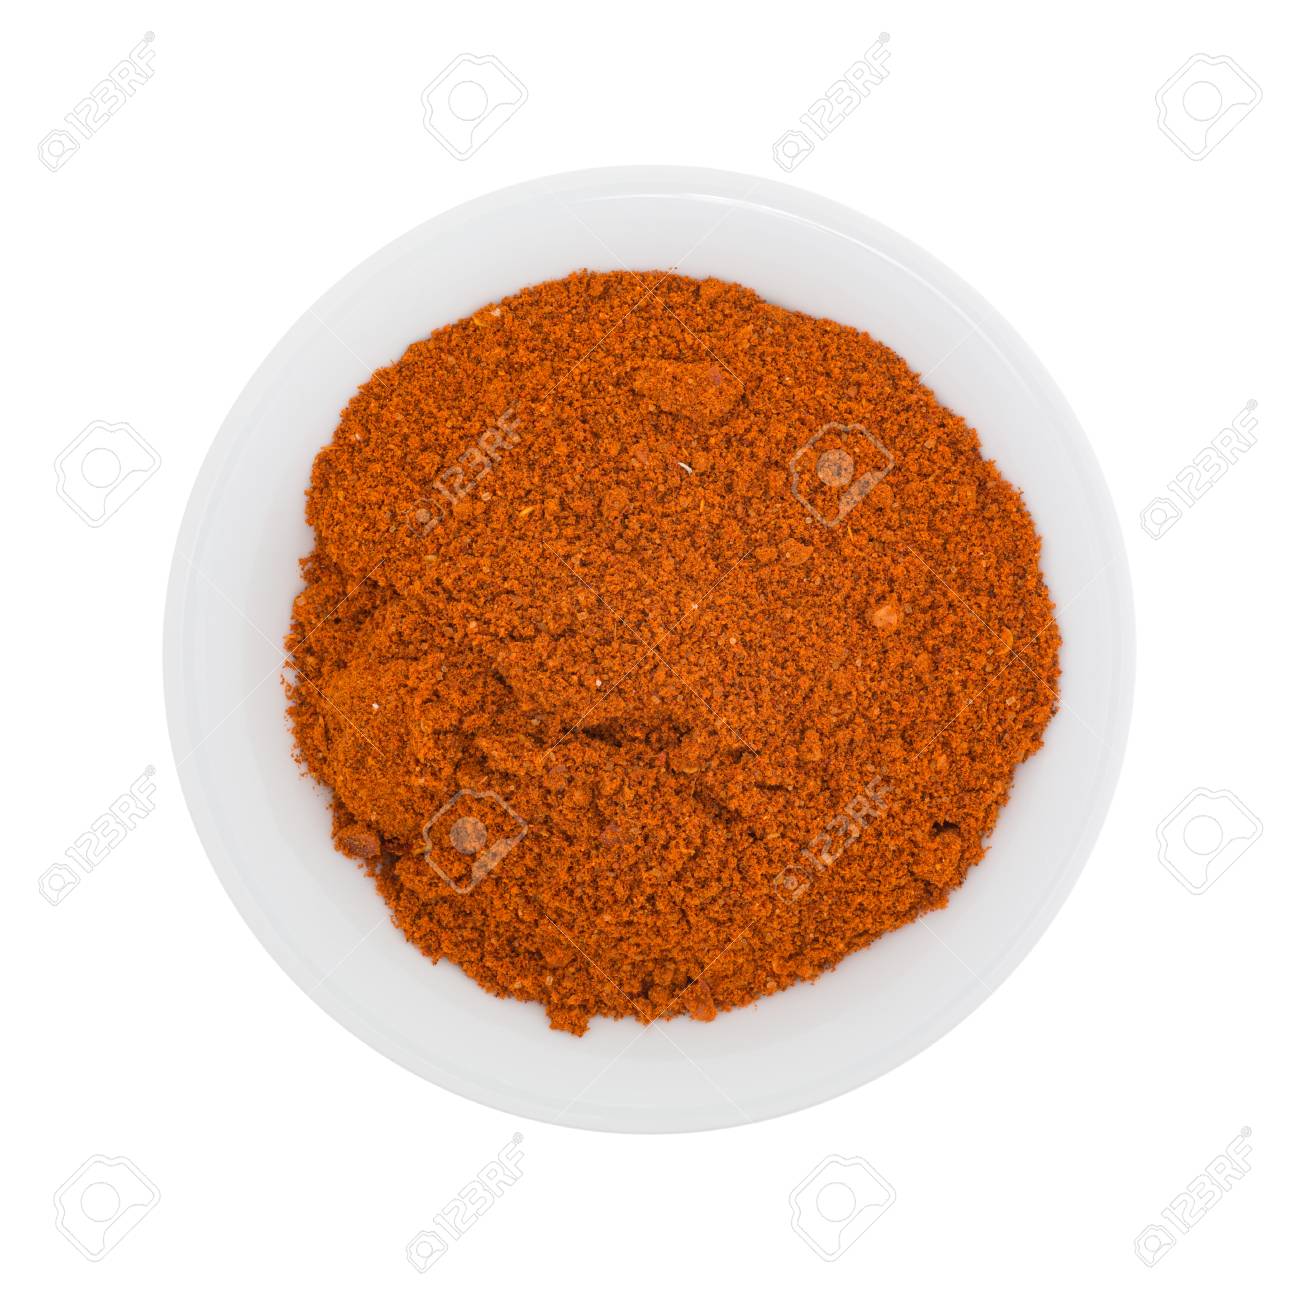 Top Of A Small Bowl Filled With Sriracha Seasonings Isolated